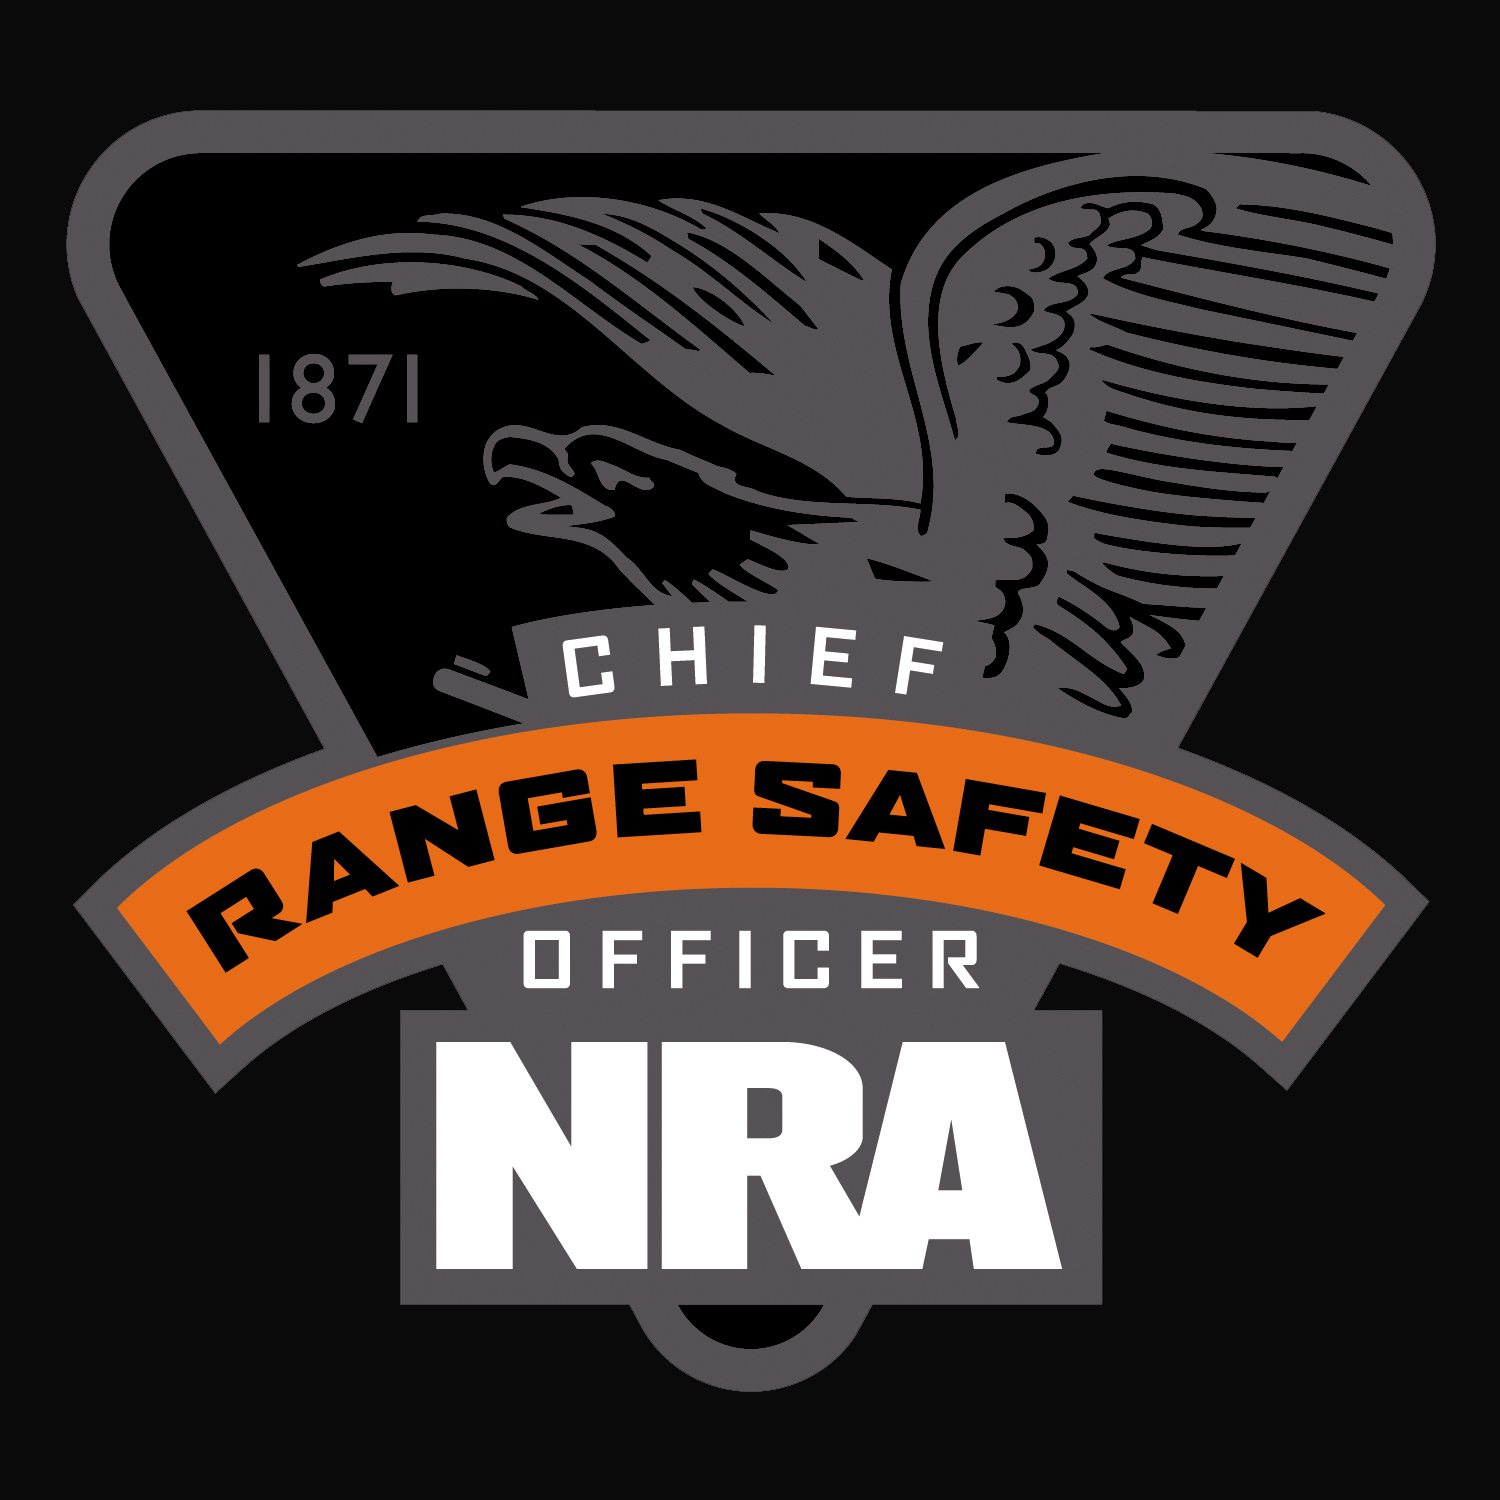 NRA Chief Range Safety Officer Course (CRSO) - R.I.S.E.